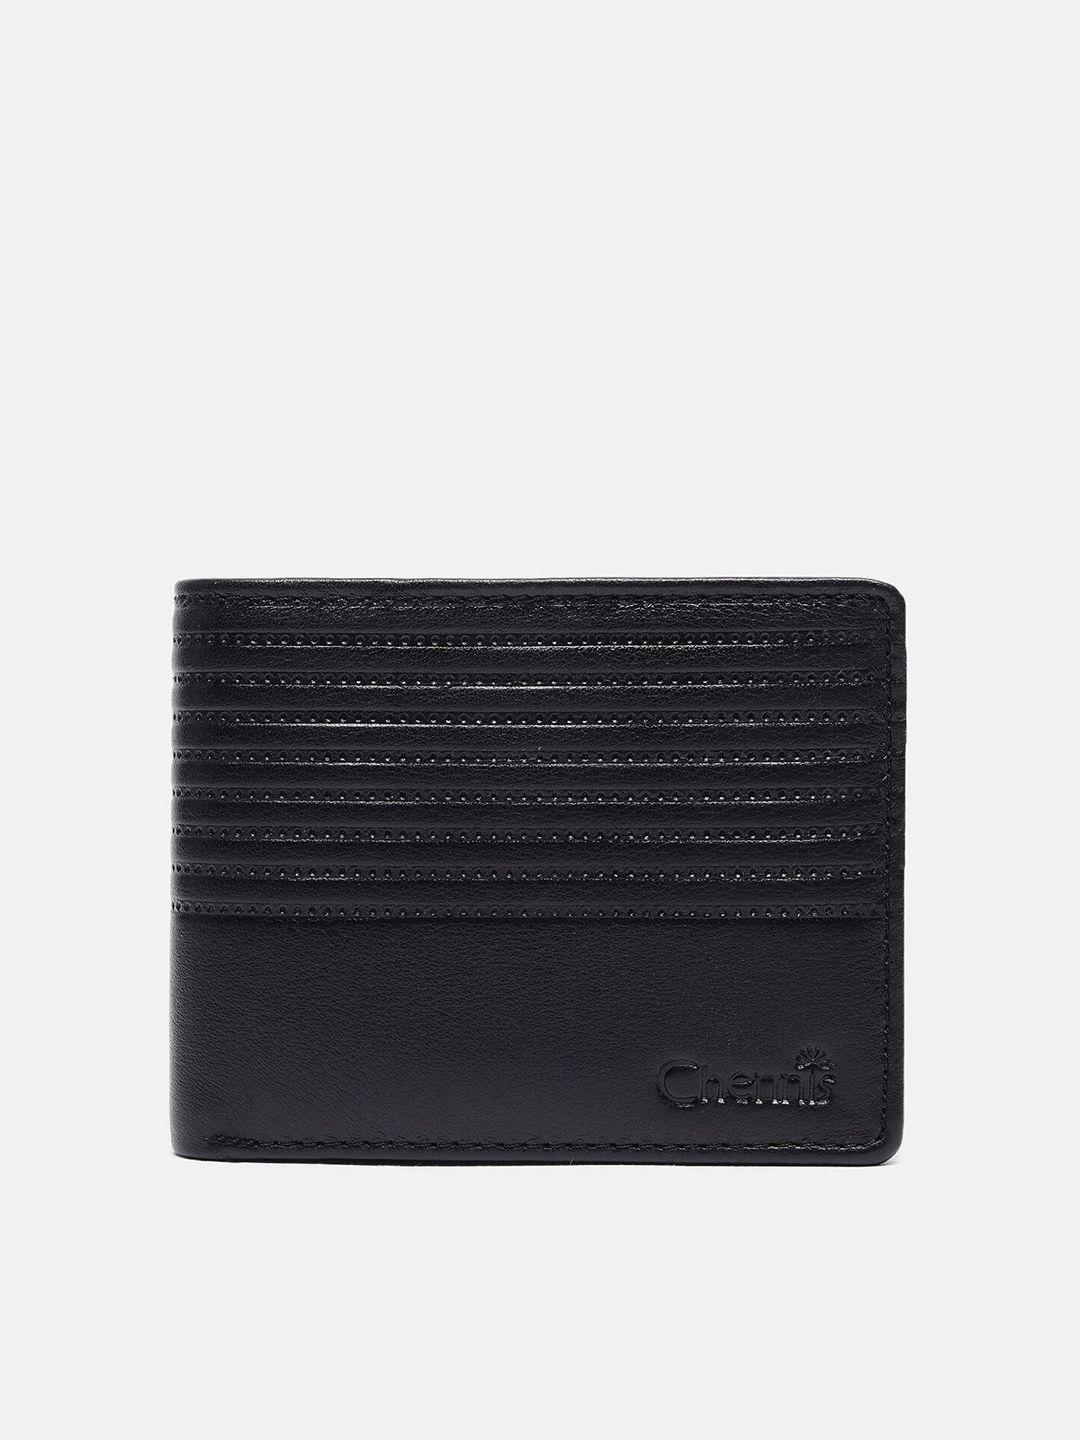 chennis men striped leather two fold wallet